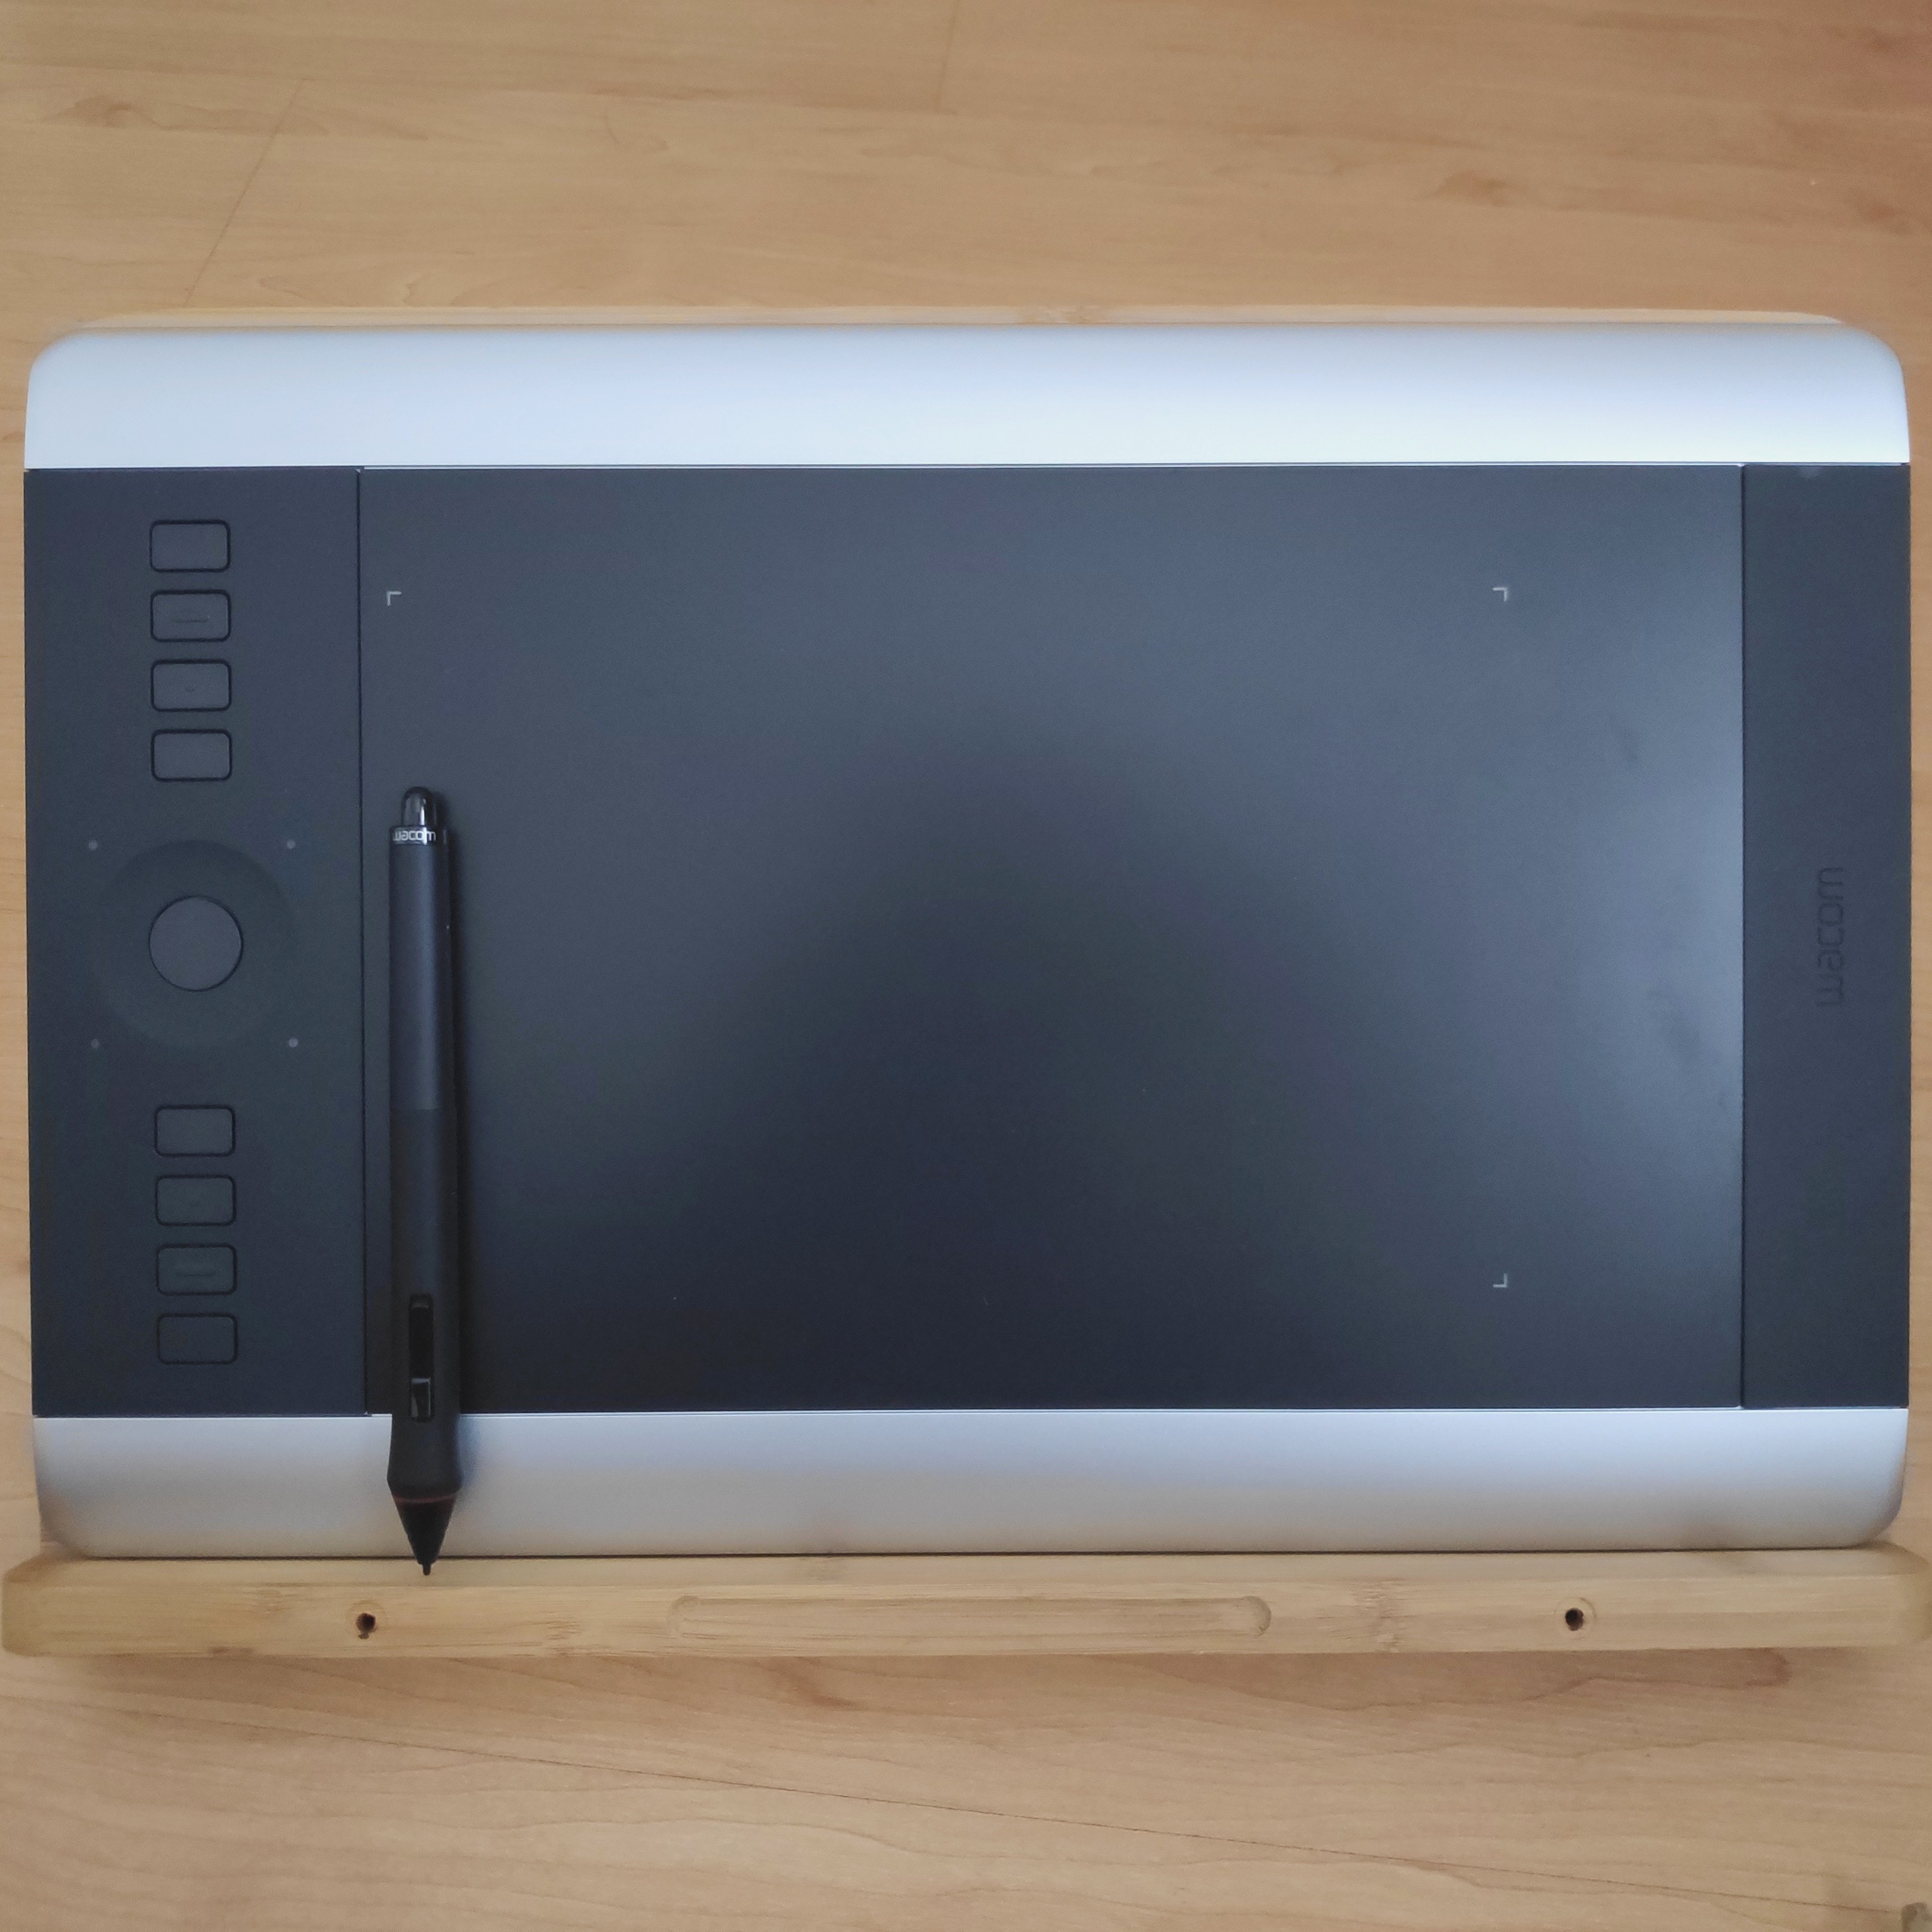 Intuos Pro M Special Edition PTH-651 Wacom, Medium size with all ...